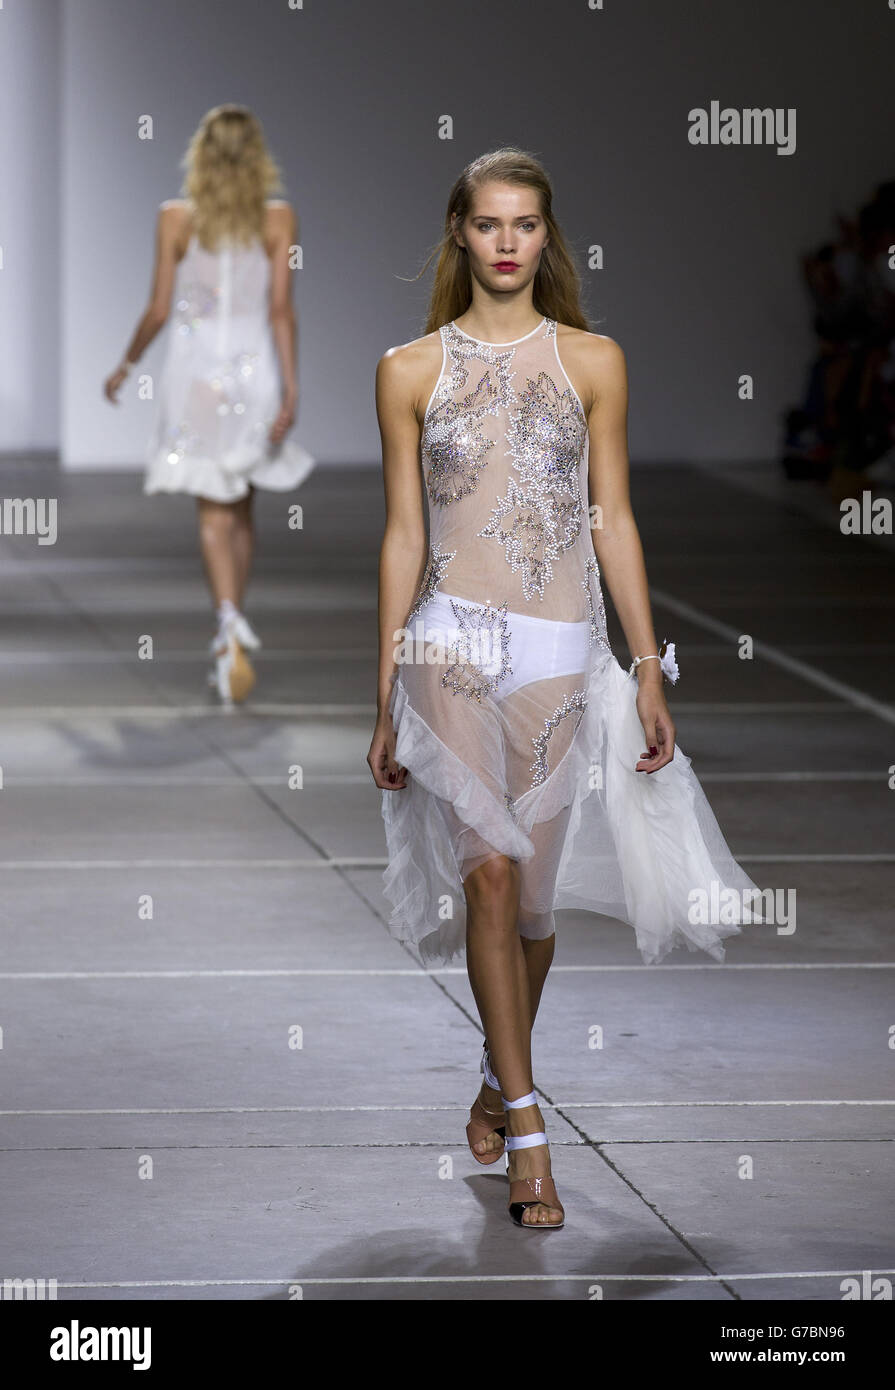 Models on the catwalk at the Topshop Show Space in London during London  Fashion Week Stock Photo - Alamy